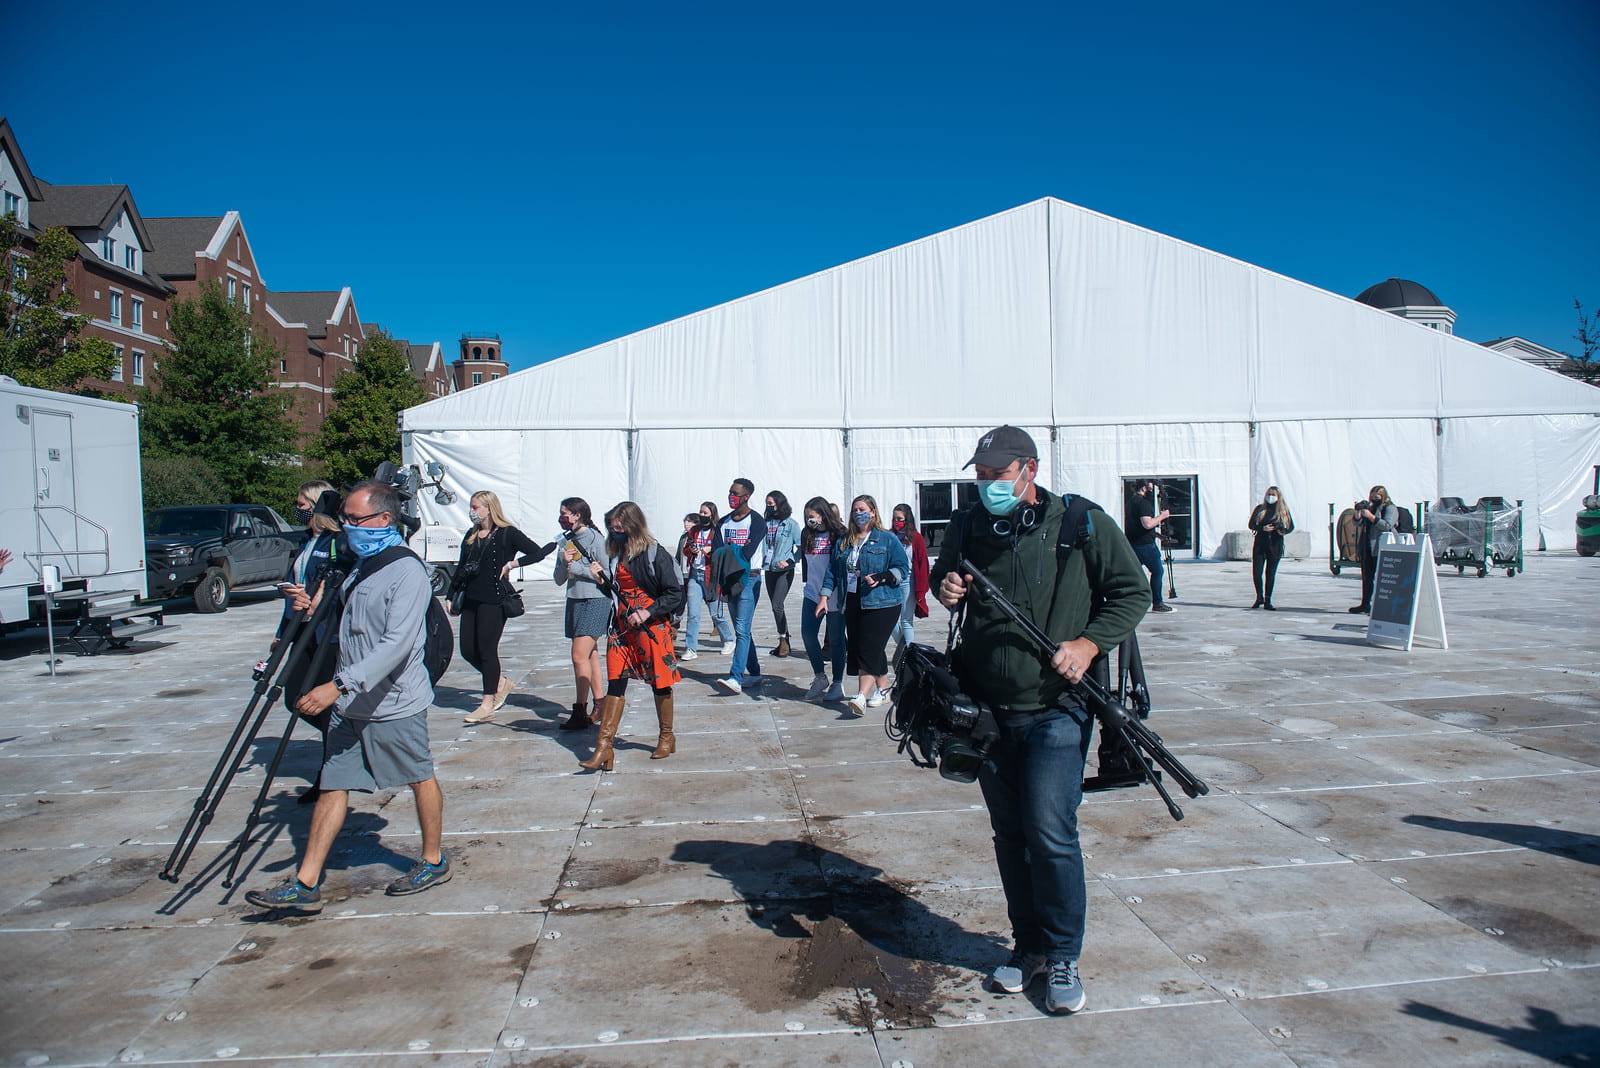 A large group of people leaving a big, white media tent located near dorm buildings.